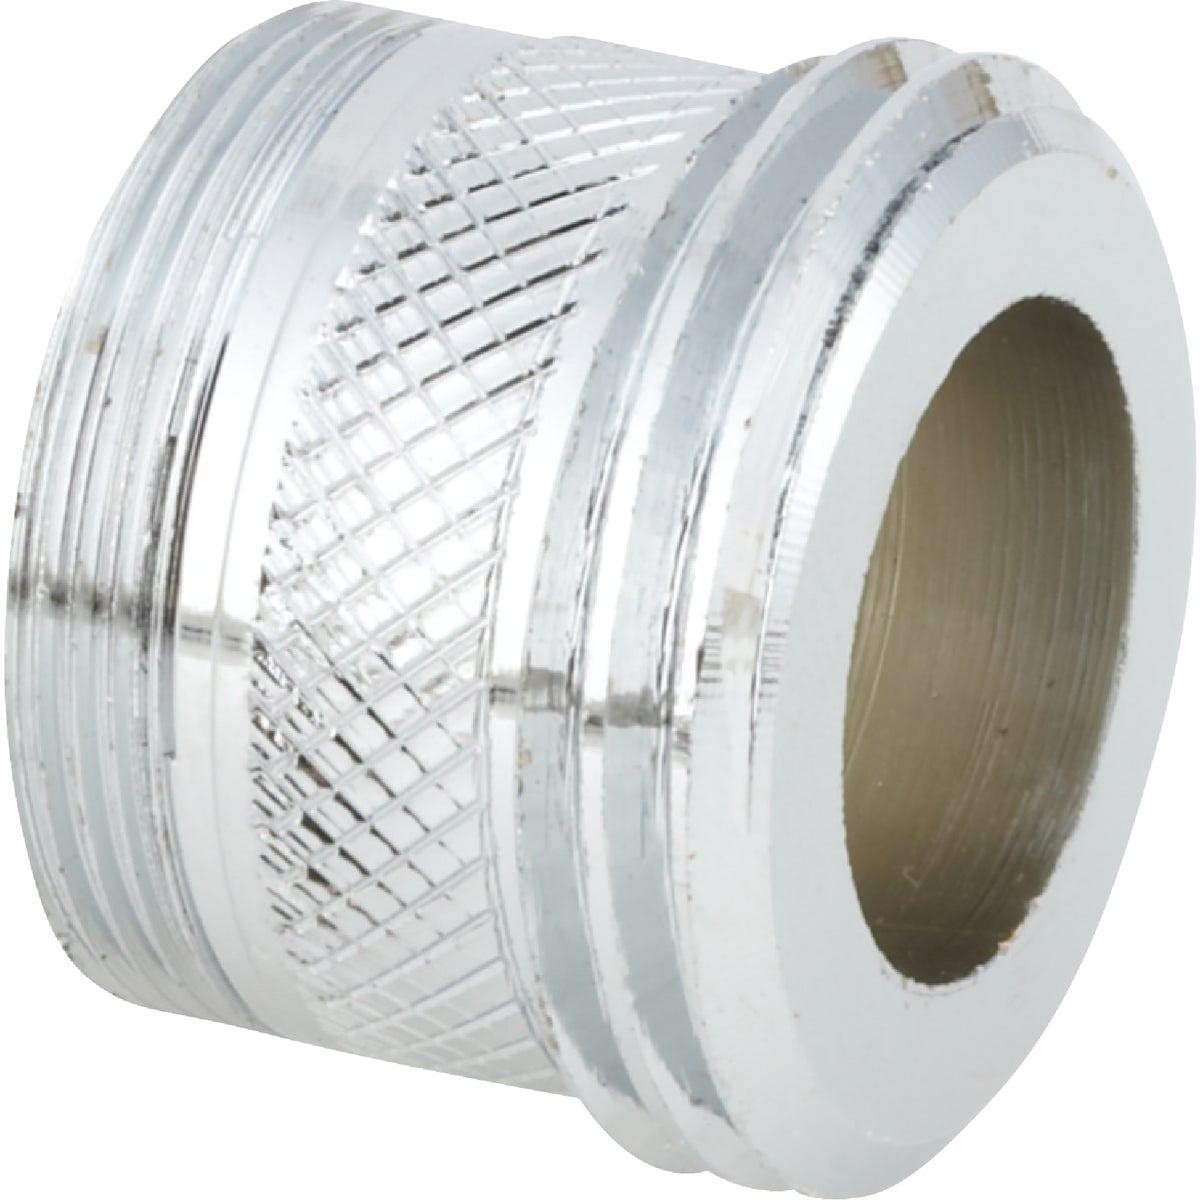 Item 408115, Converts 15/16" - 27 outside, 55/64" - 27 inside to 3/4" garden hose thread